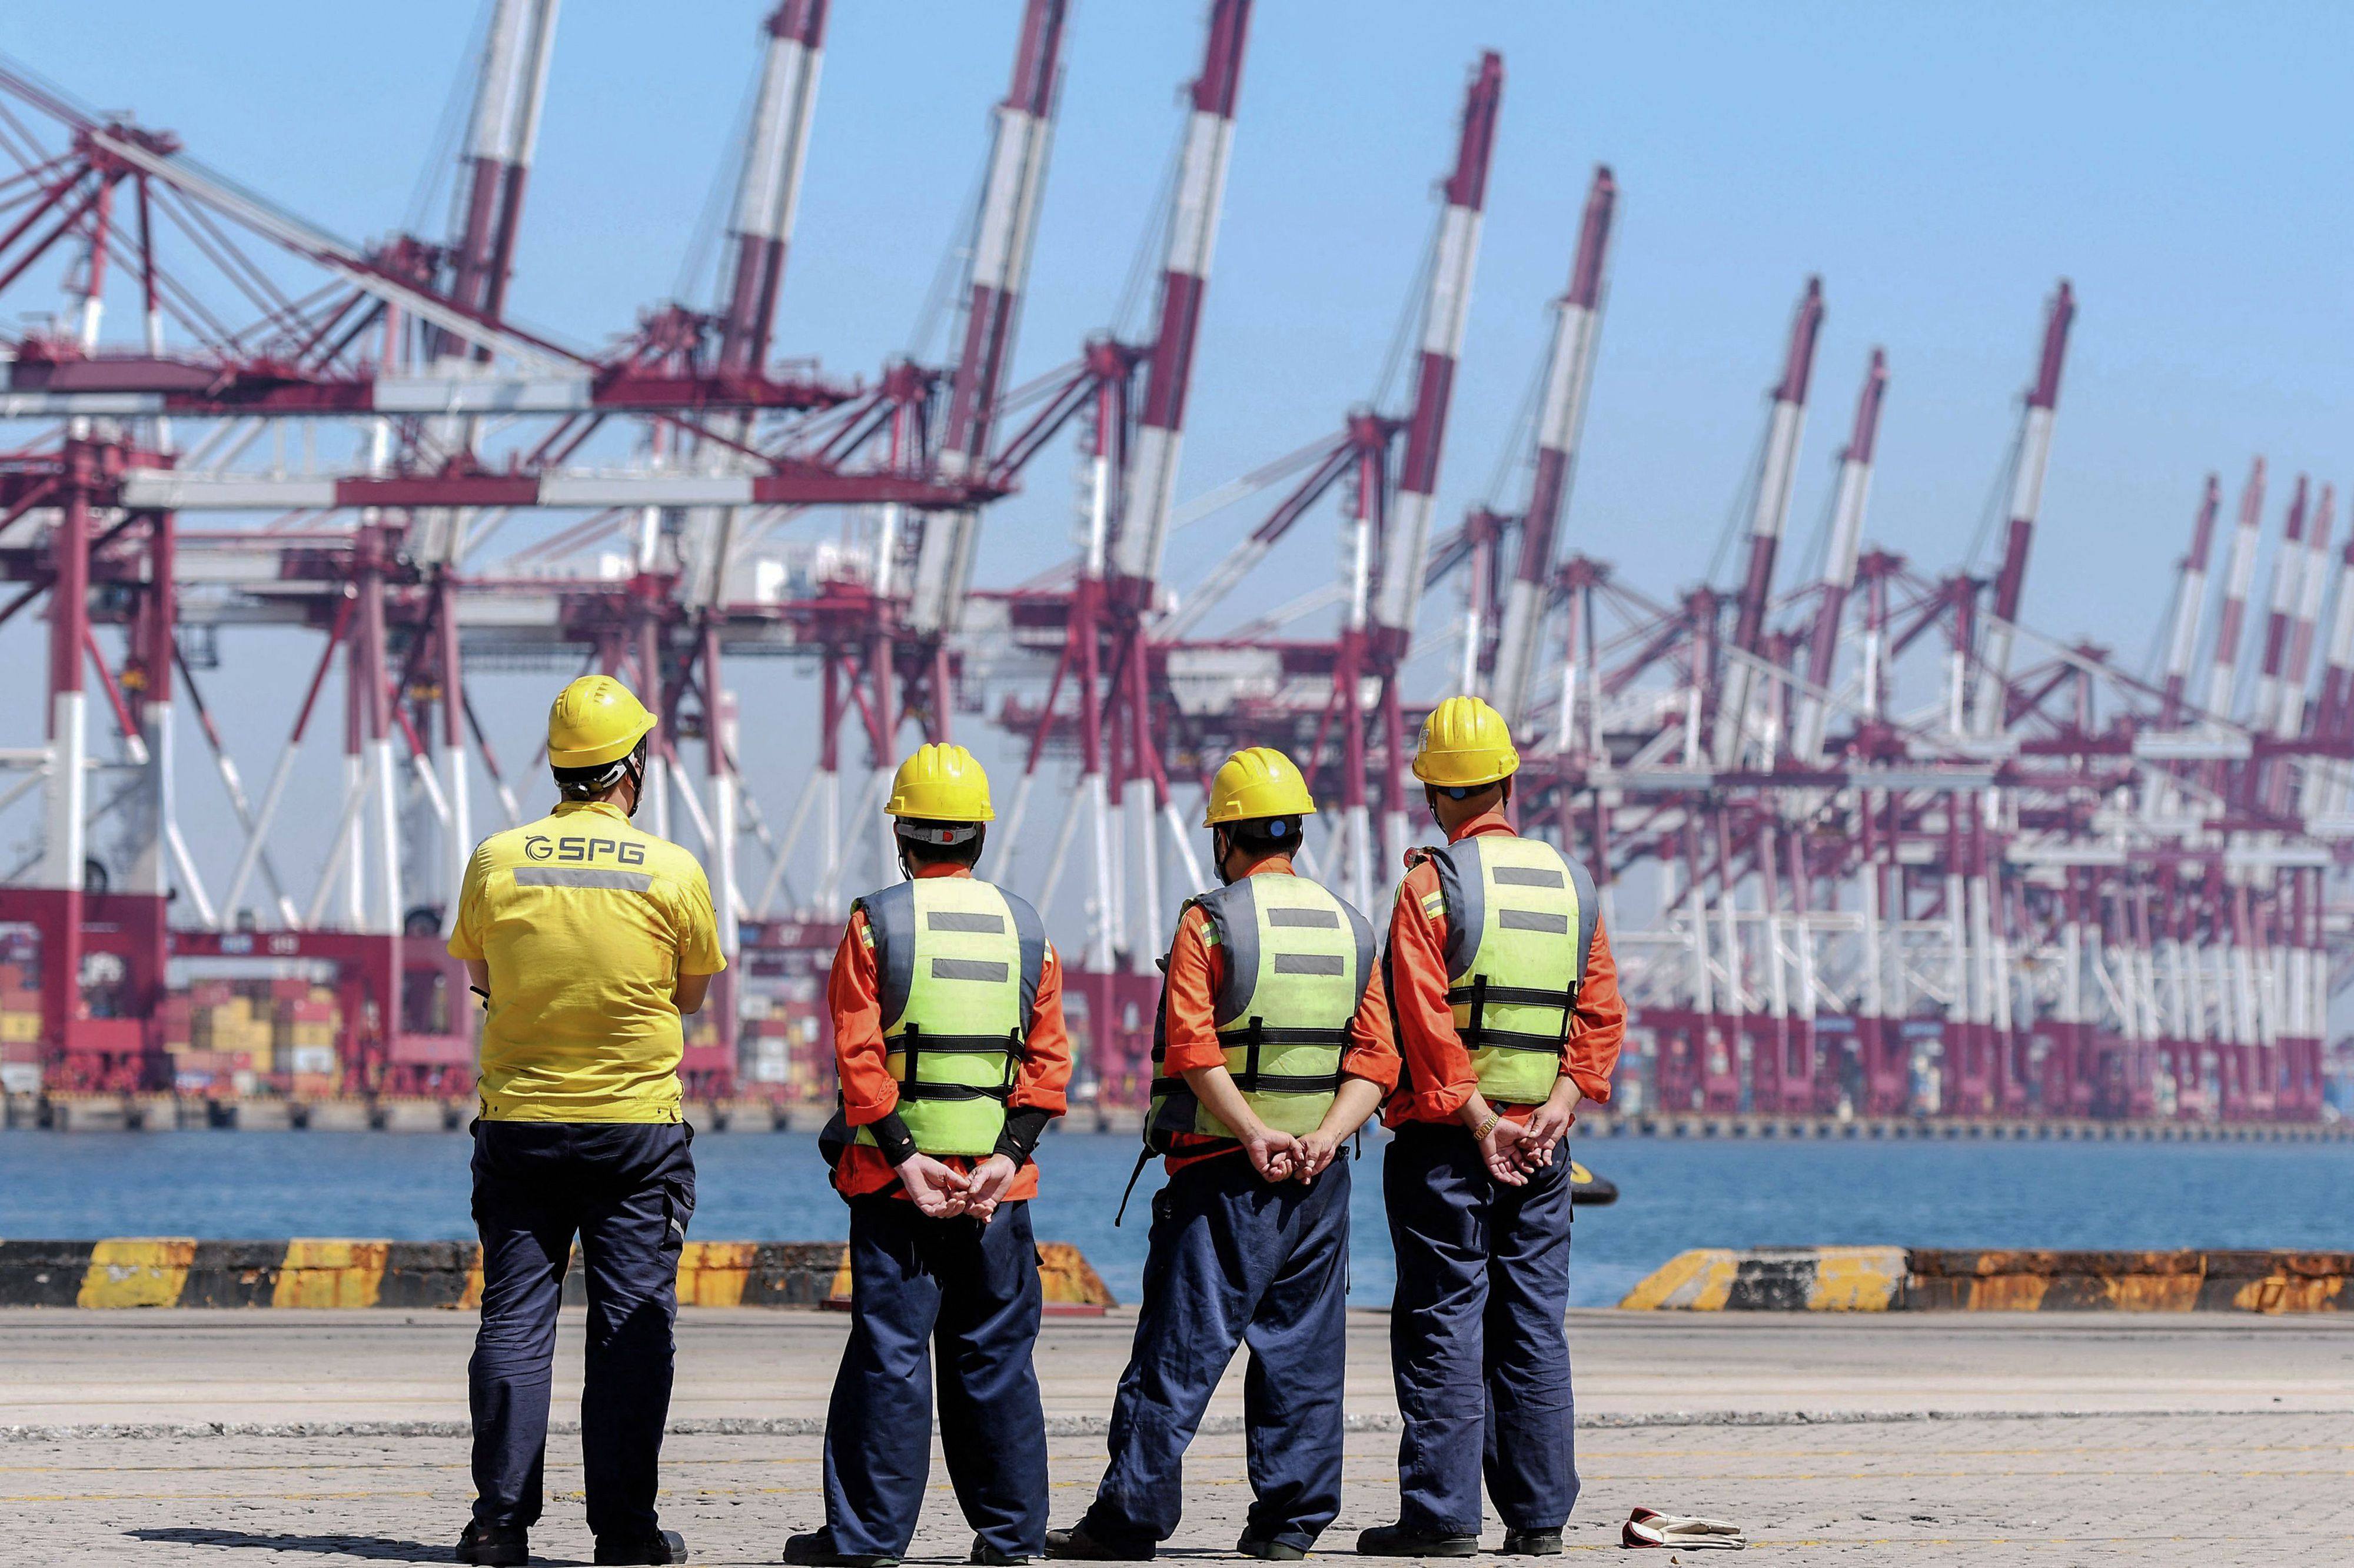 Employees look on at a port in Qingdao in China’s eastern Shandong province on September 7. It is highly improbable that growth in net exports will be the main driver of the Chinese economy for much longer. Photo: AFP